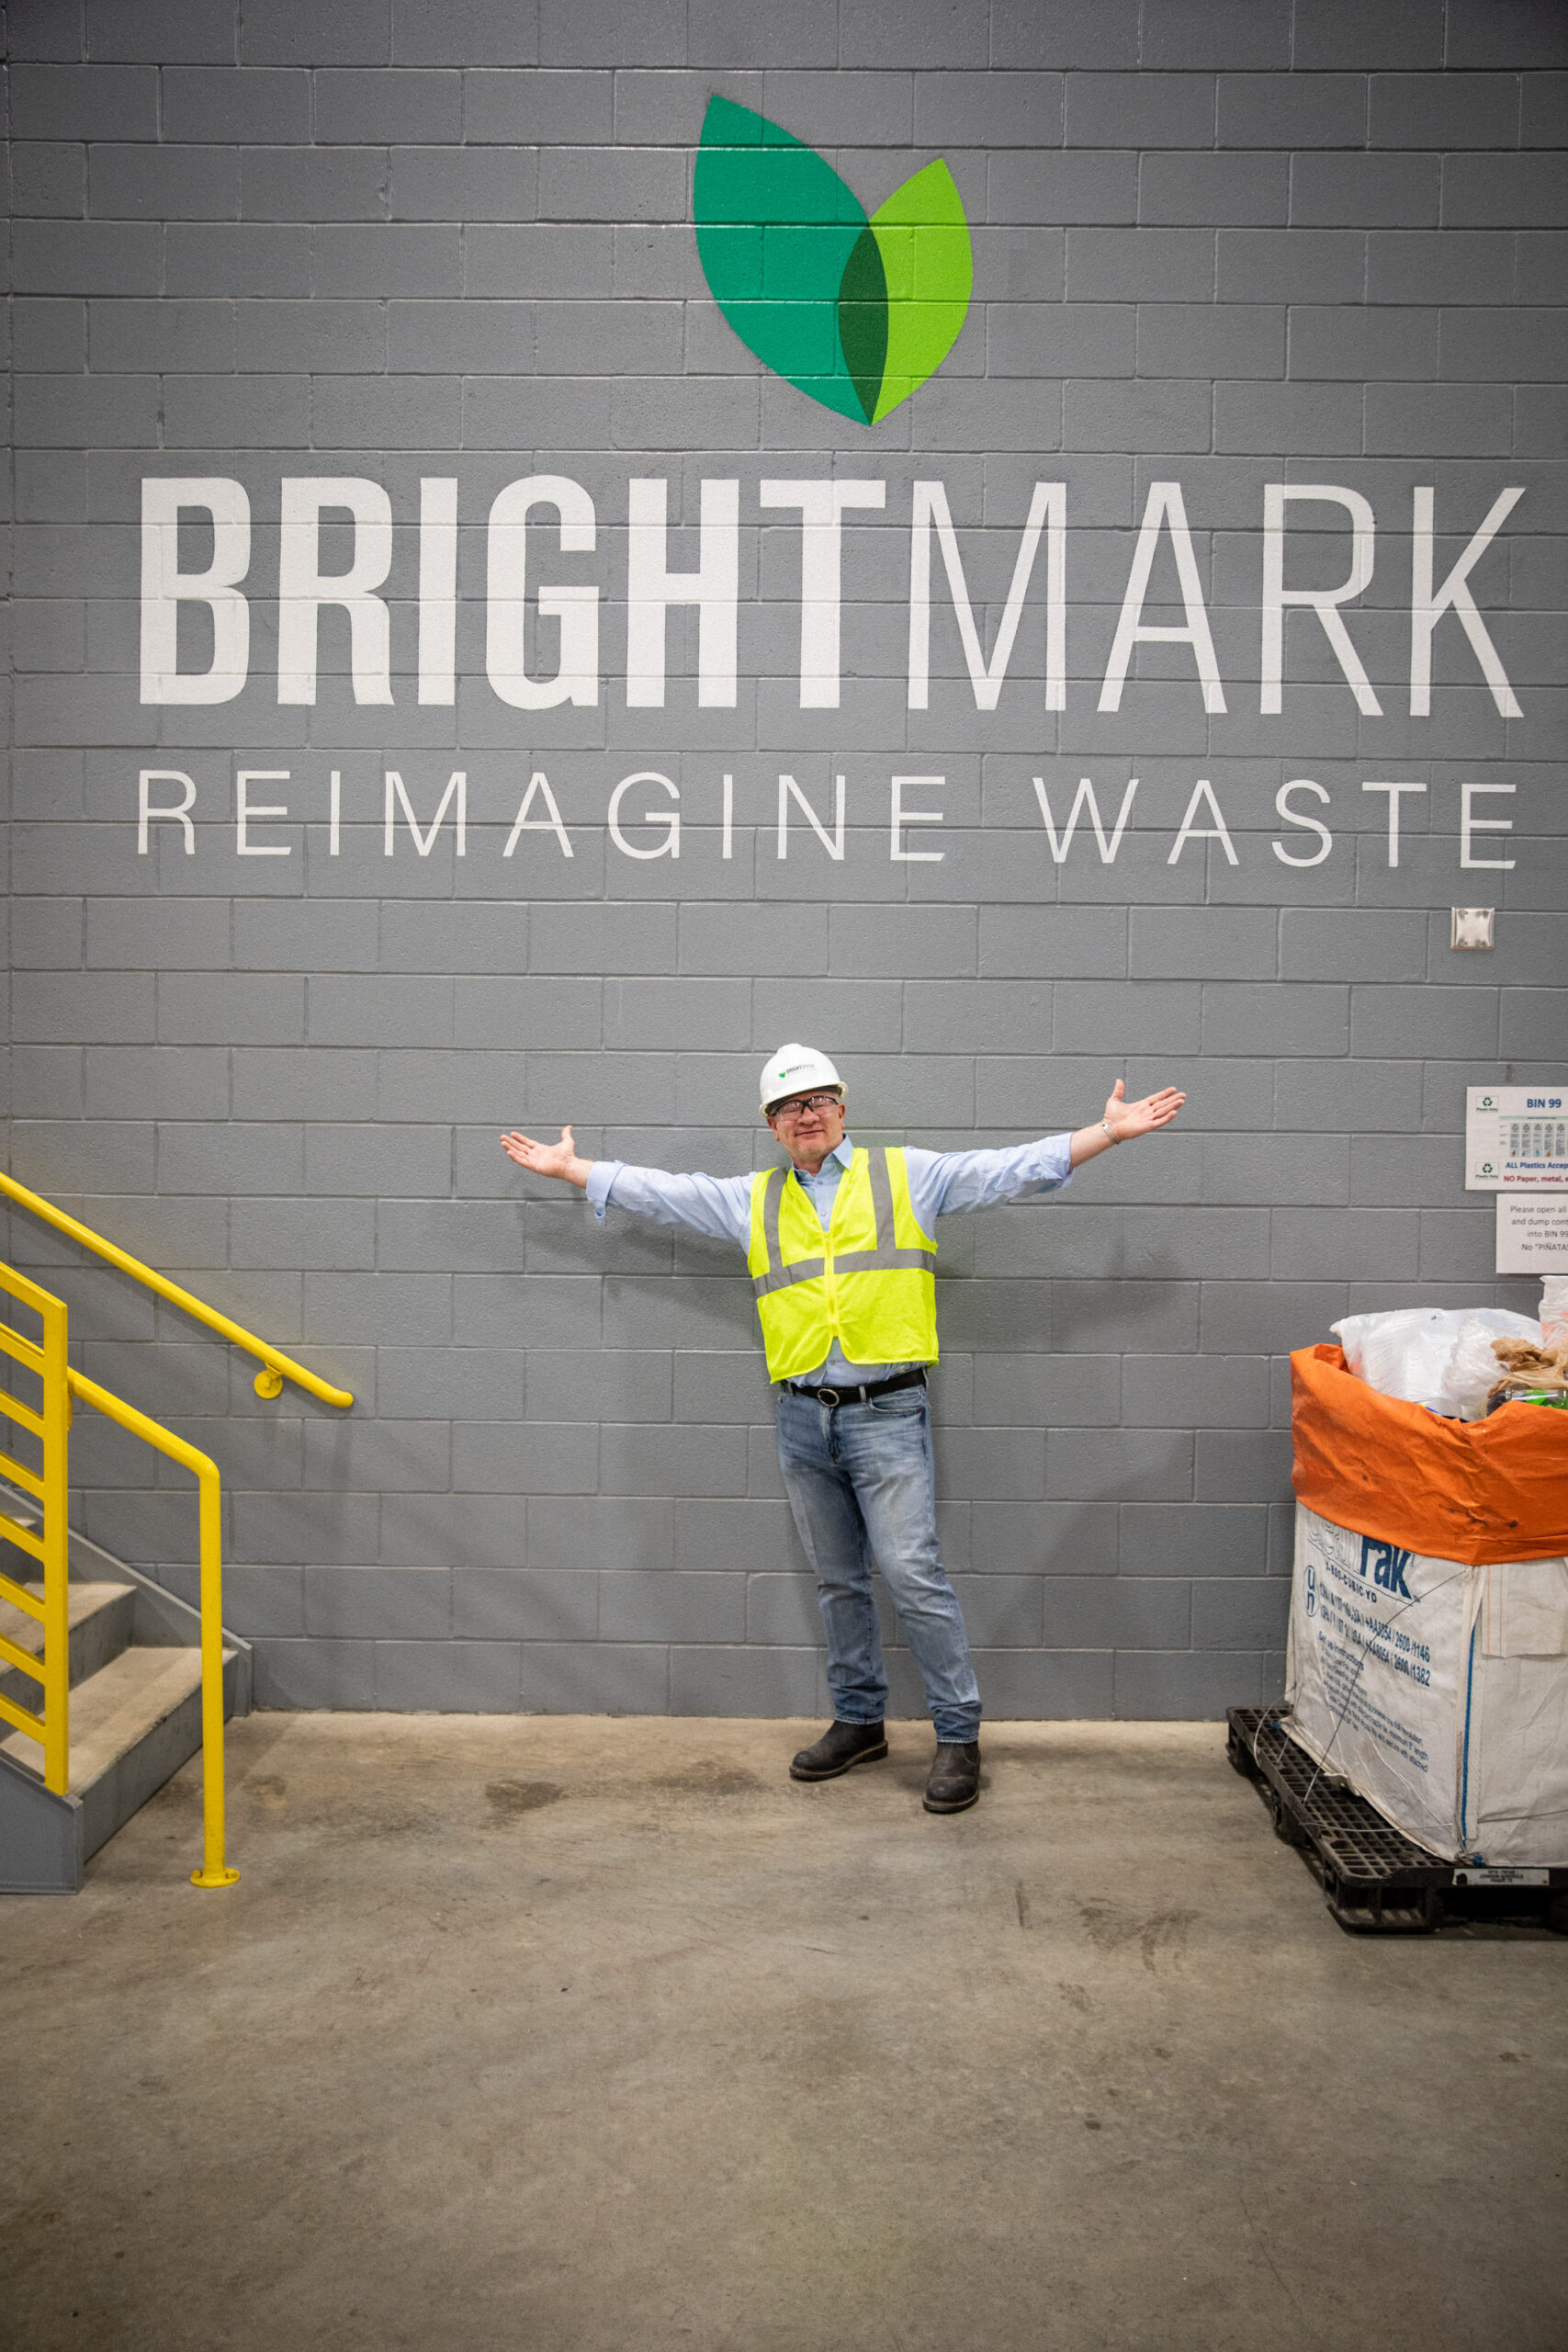 Bob Powell in front of Brightmark sign at plastics facility